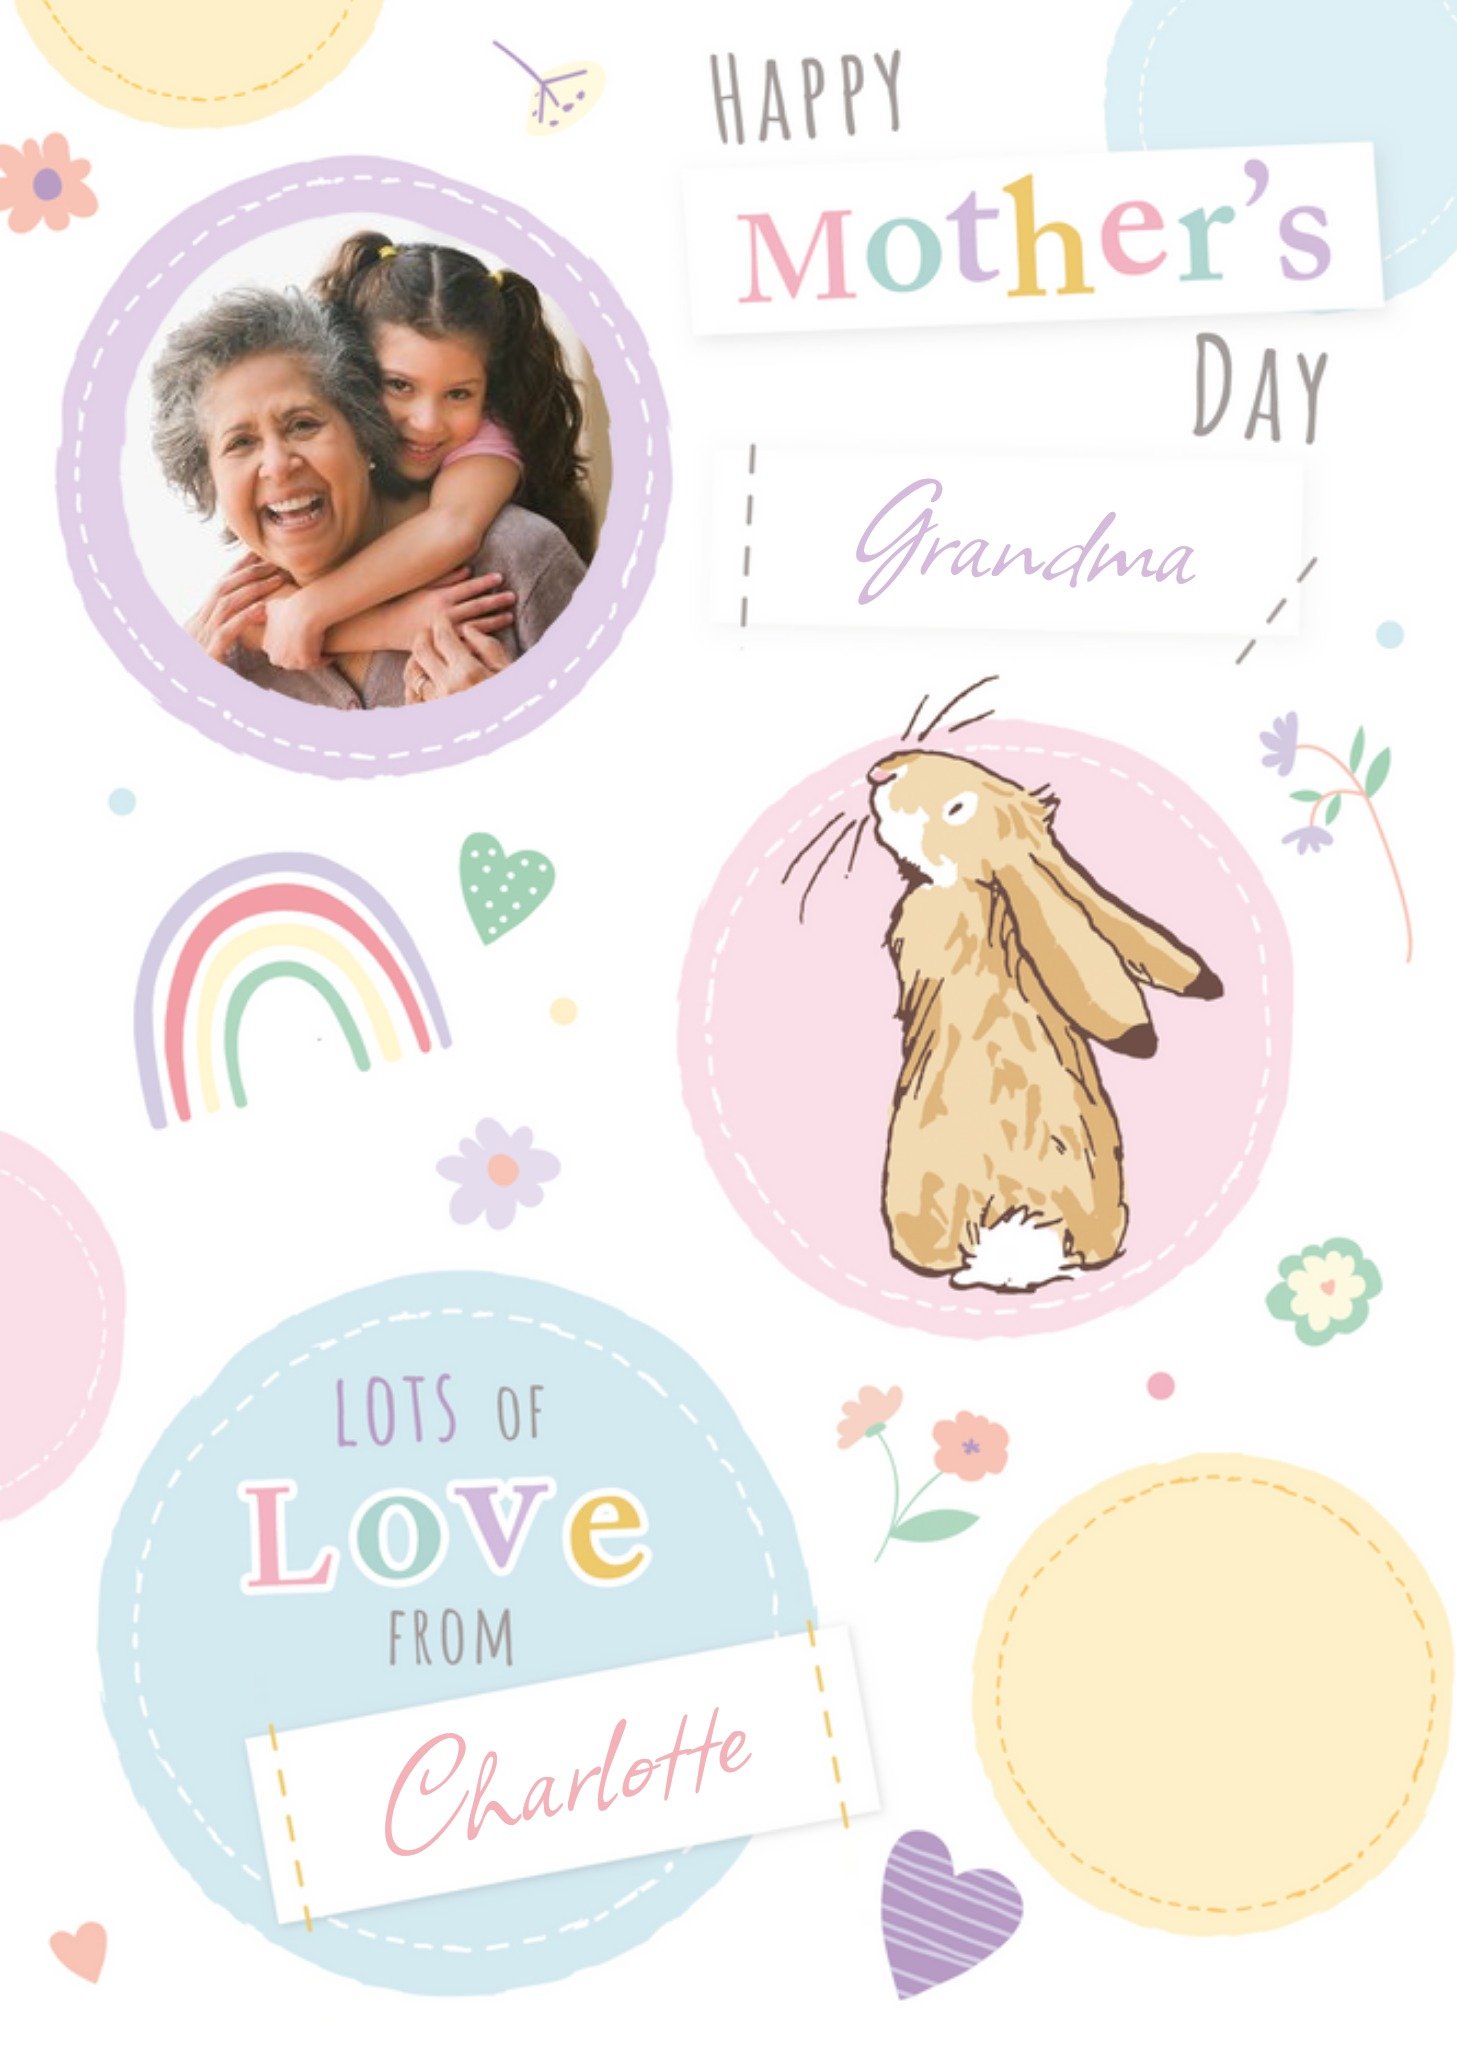 Danilo Guess How Much I Love You Mother's Day Grandma Photo Upload Card Ecard